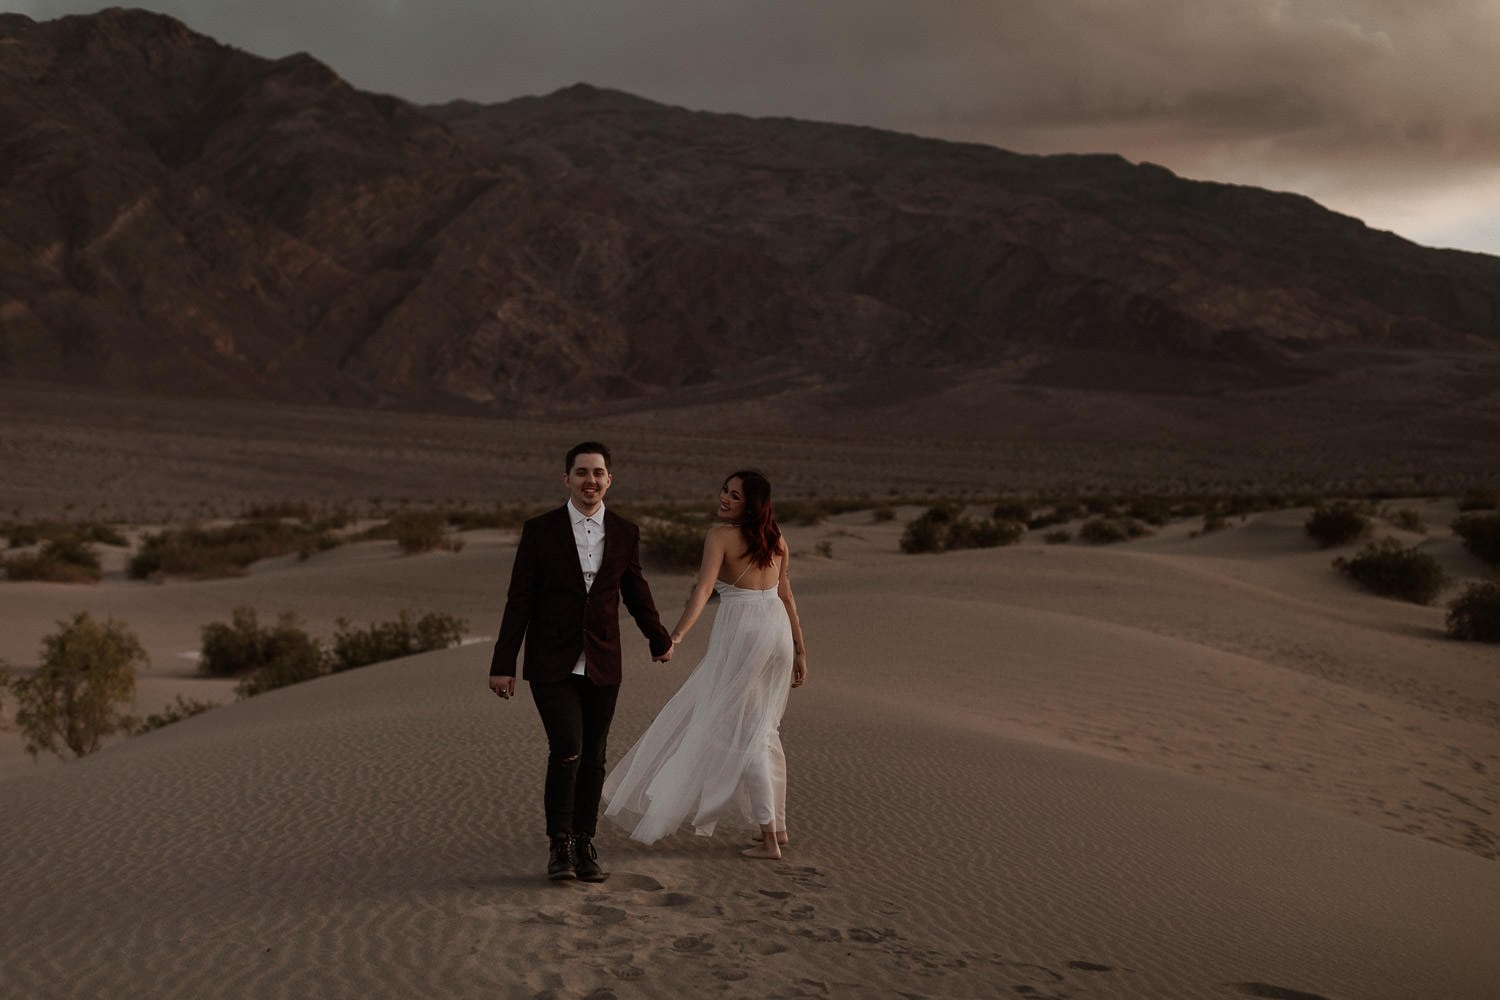 Elopement couple walk along the sand dunes, enjoying their time together after their small wedding ceremony